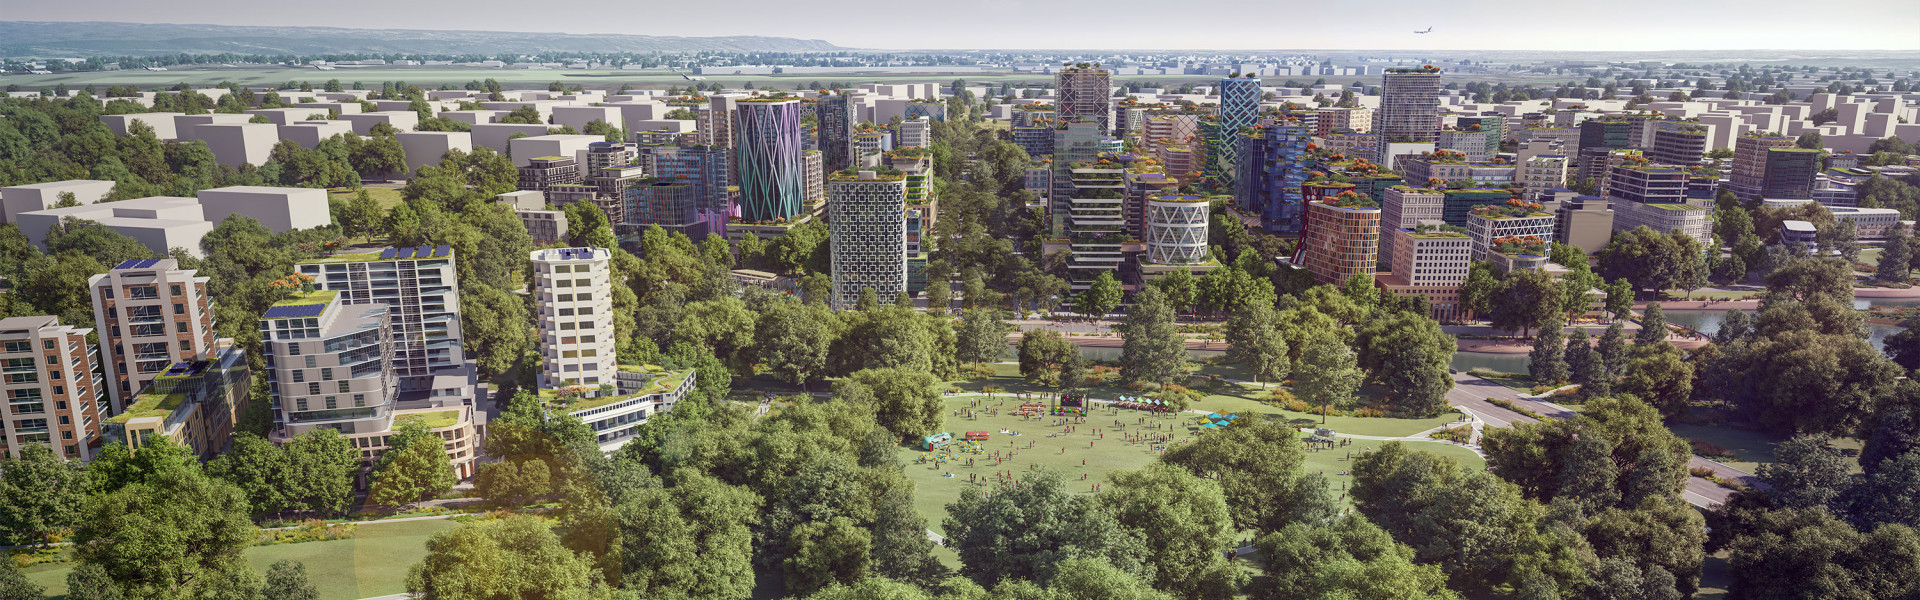 Artists render of Bradfield City Centre. Looking across an artist's impression of buildings in a city on a sunny day, with parkland in the foreground.